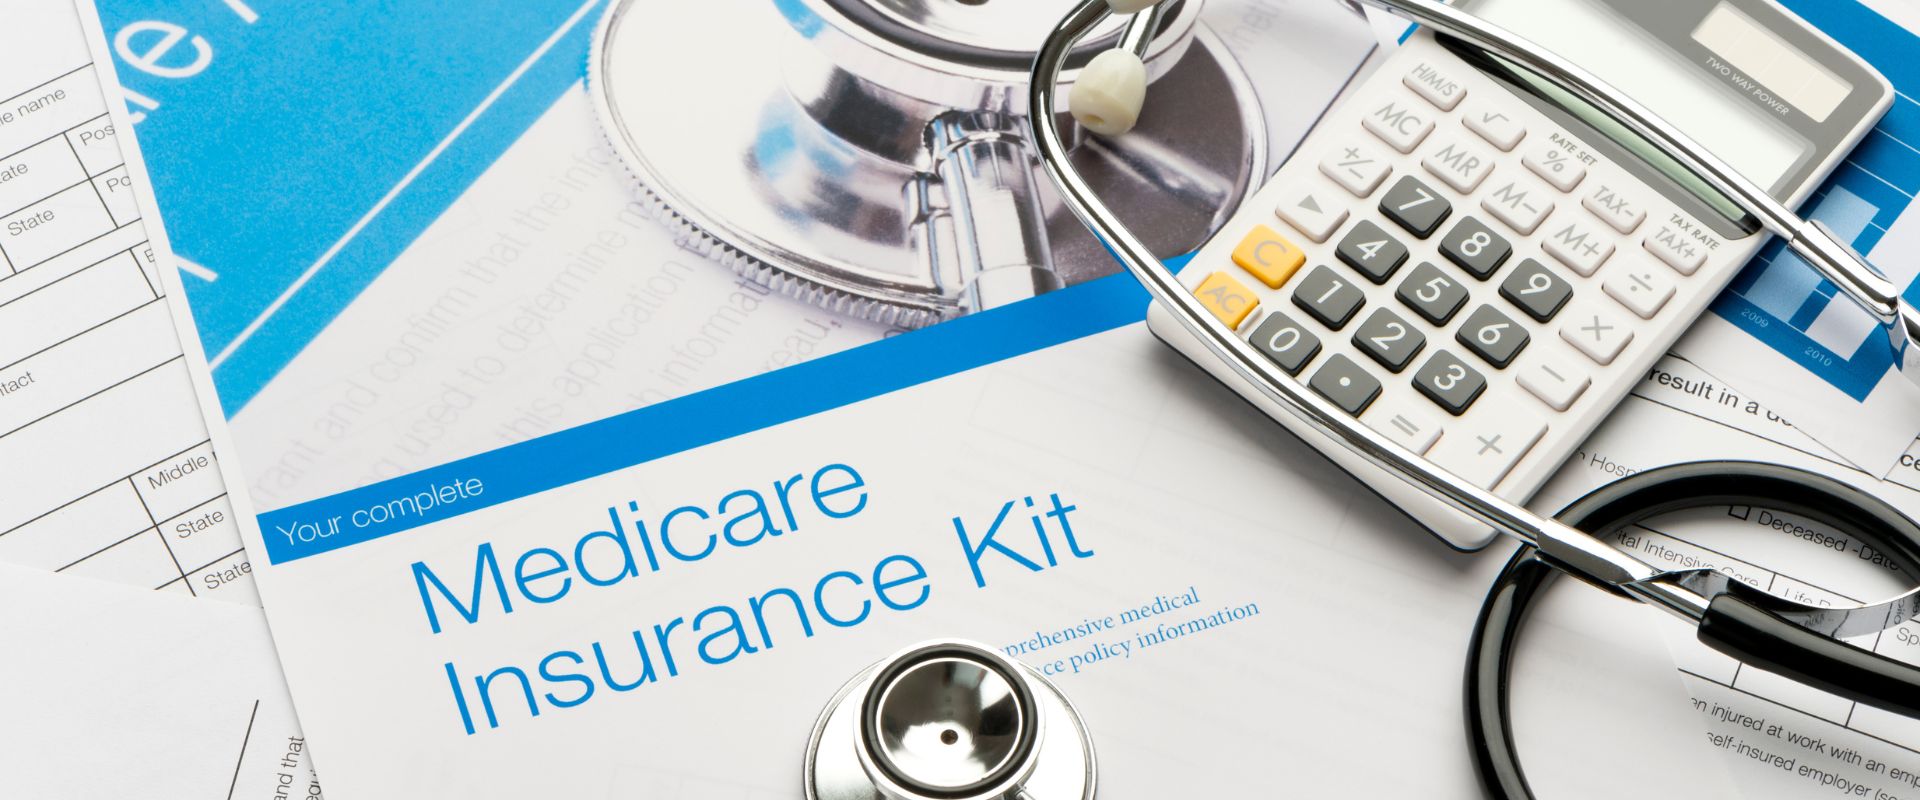 Medicare Savings Program tools for counting income eligibility